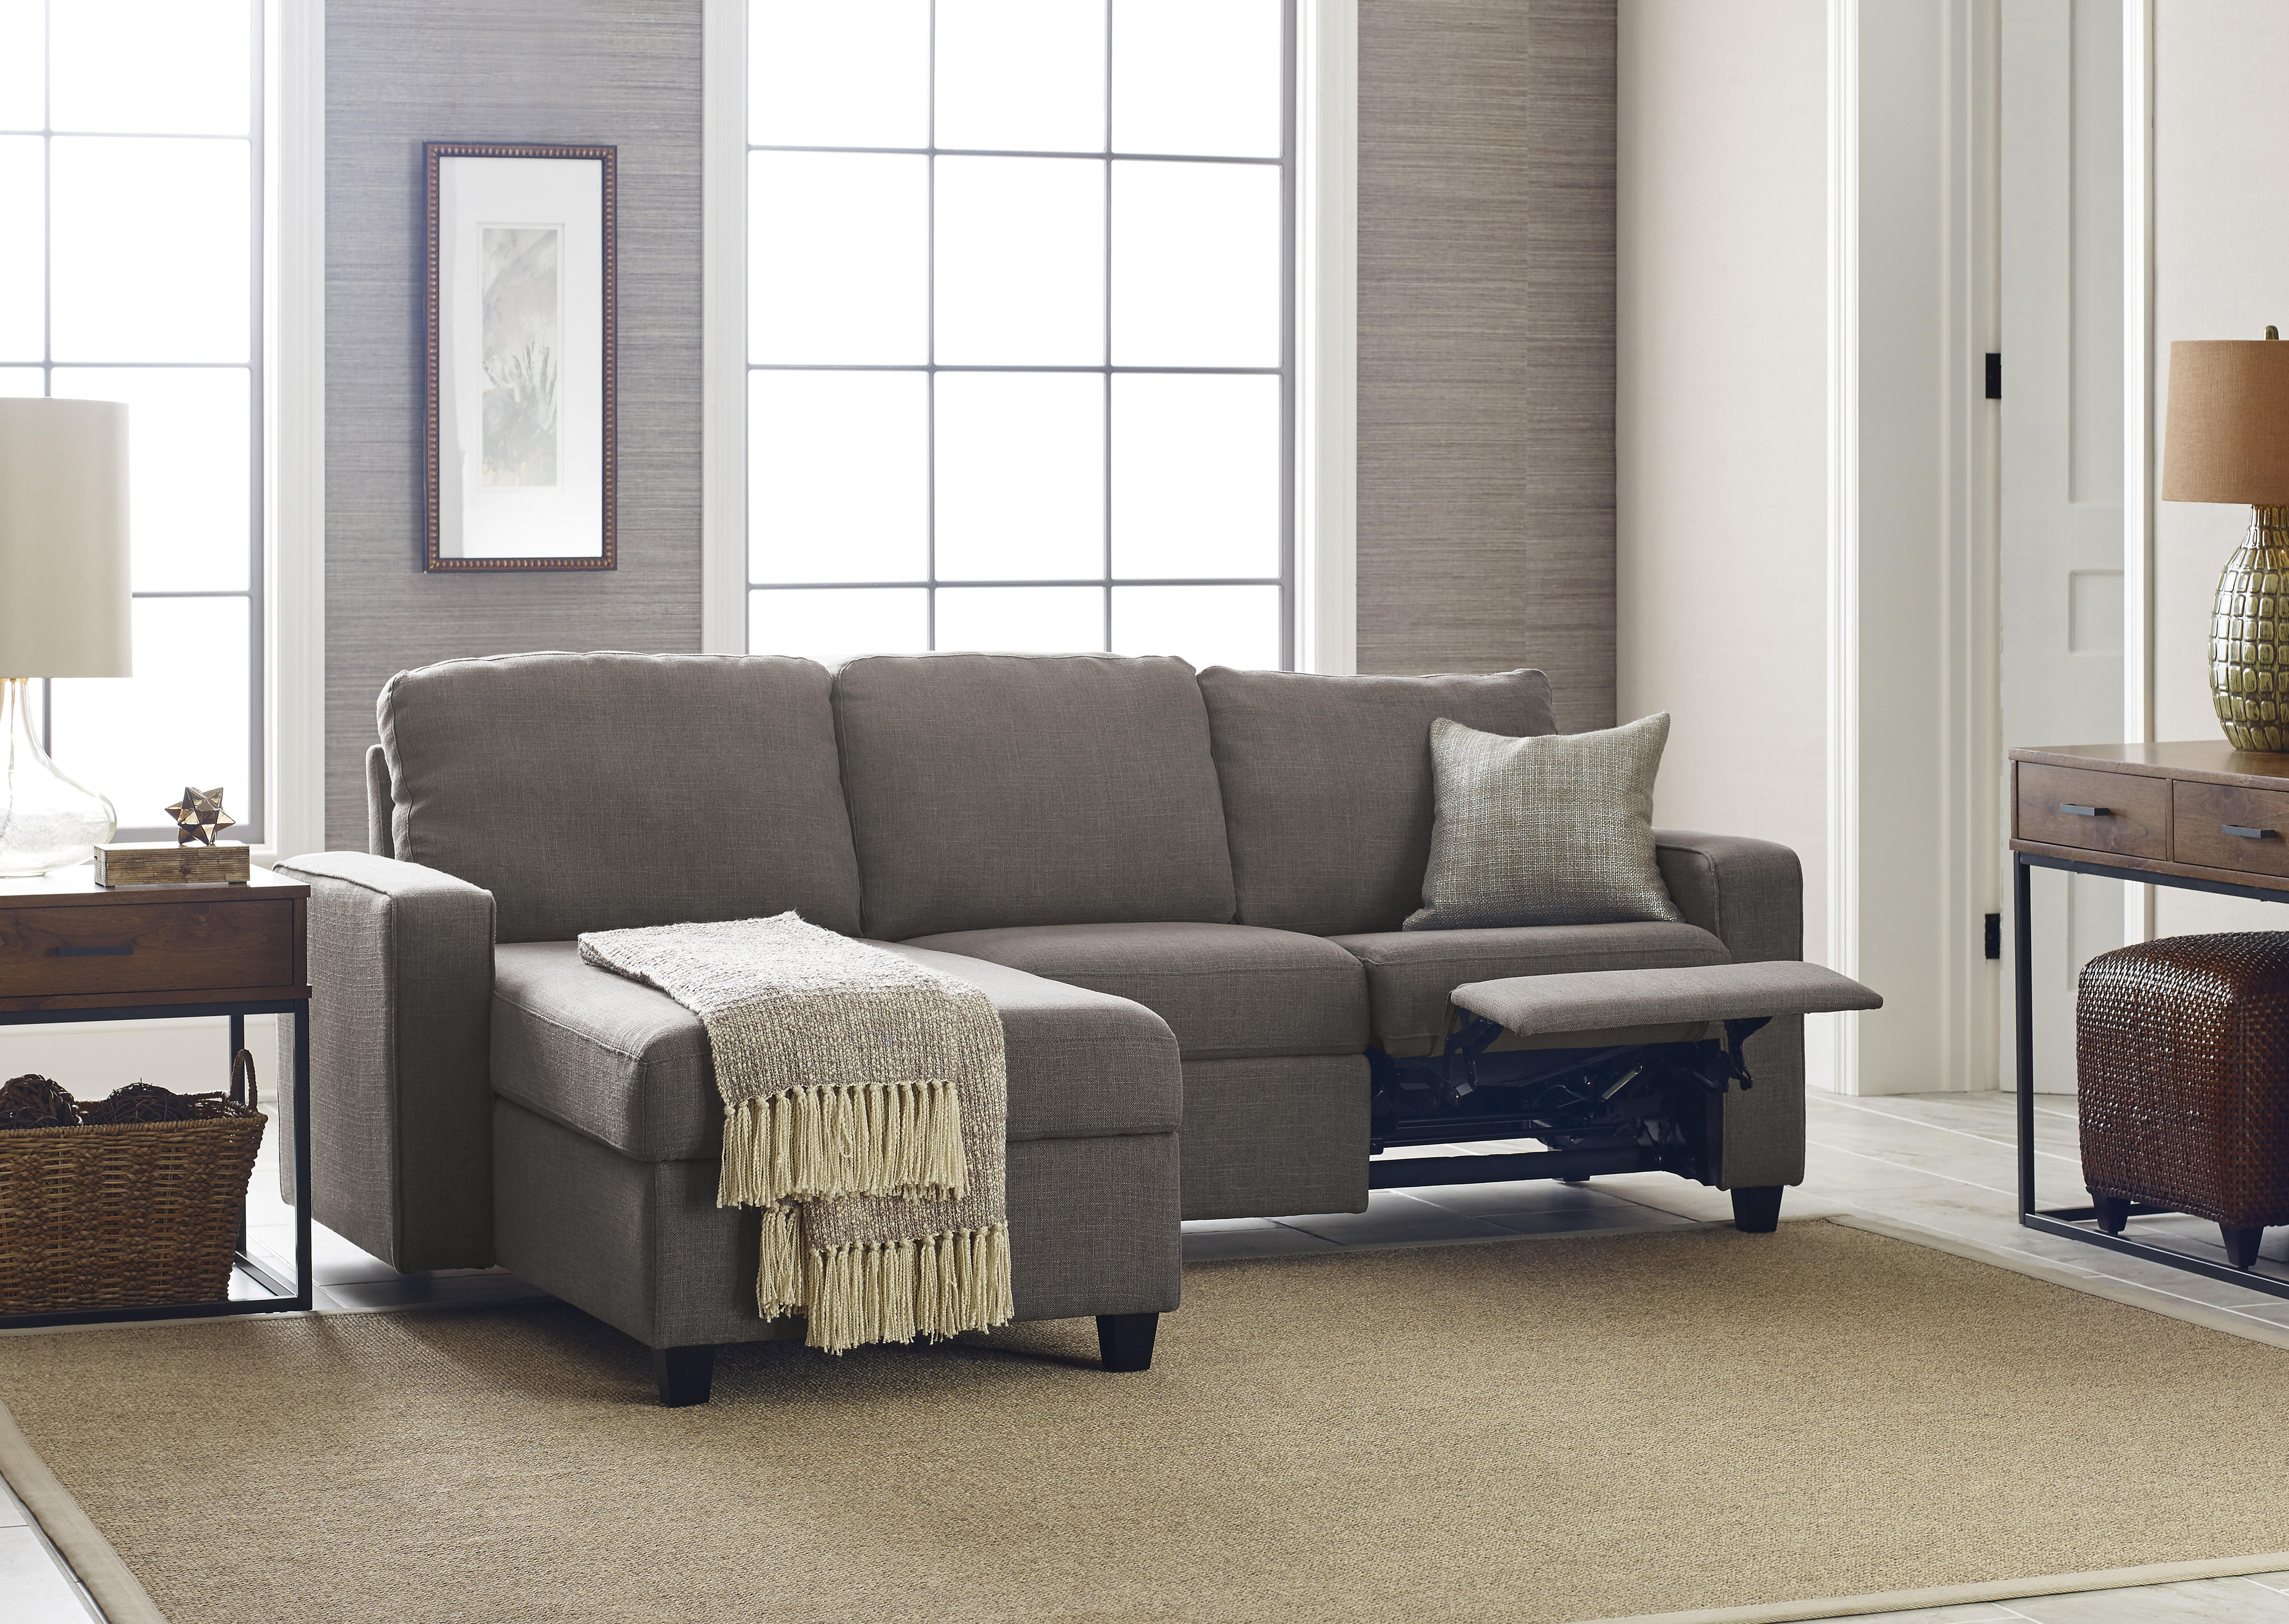 Serta Palisades Reclining Sectional with Left Storage Chaise - Gray - image 1 of 9